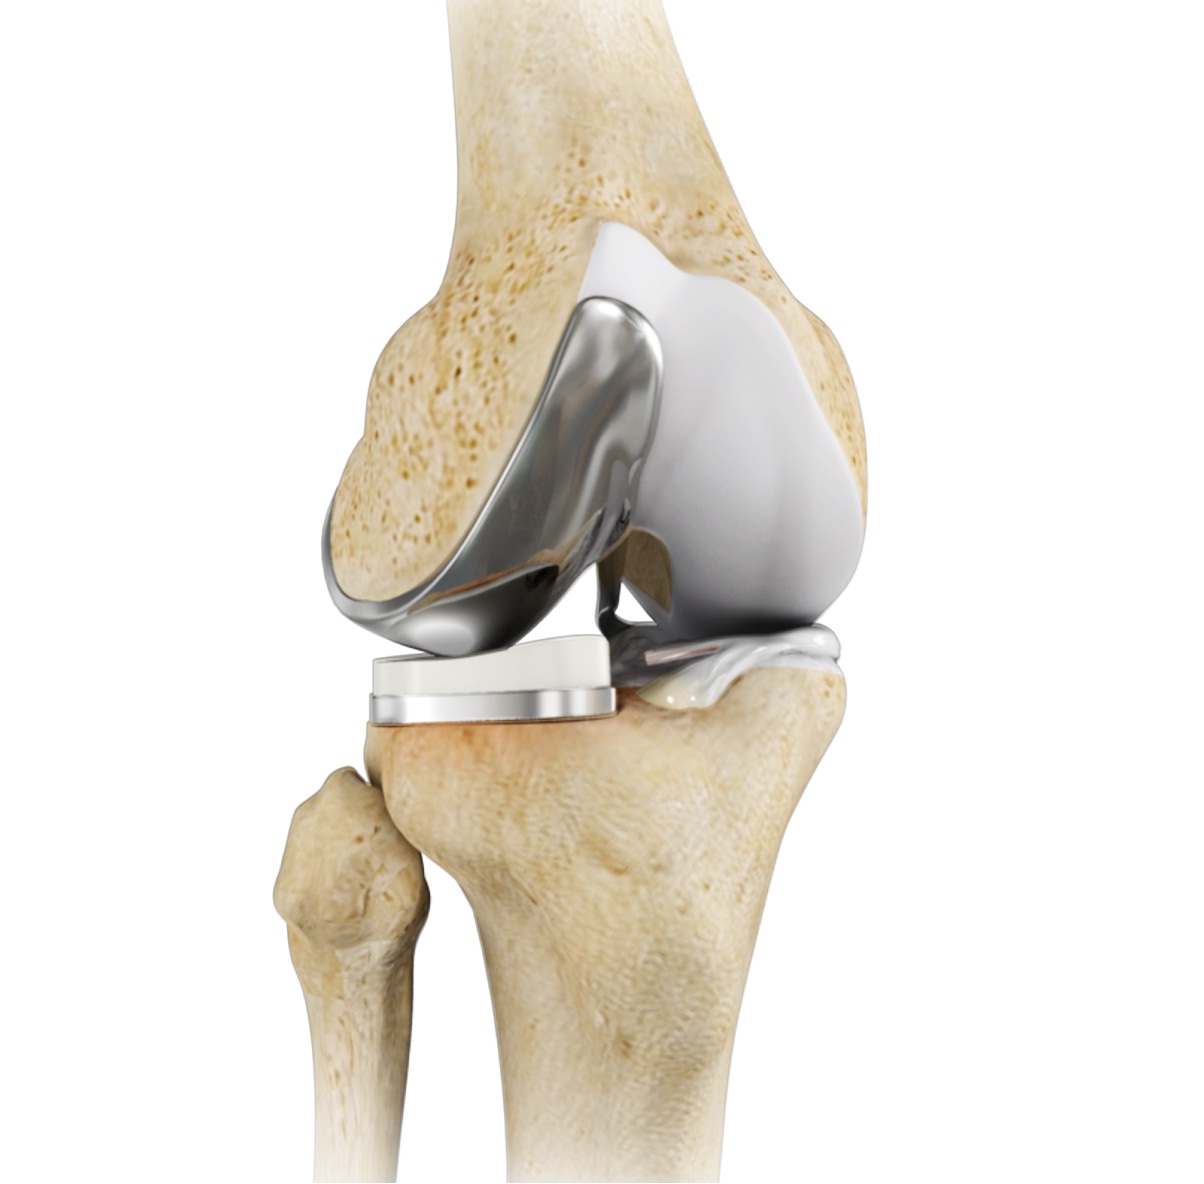 Is Partial Knee Joint Replacement For You?